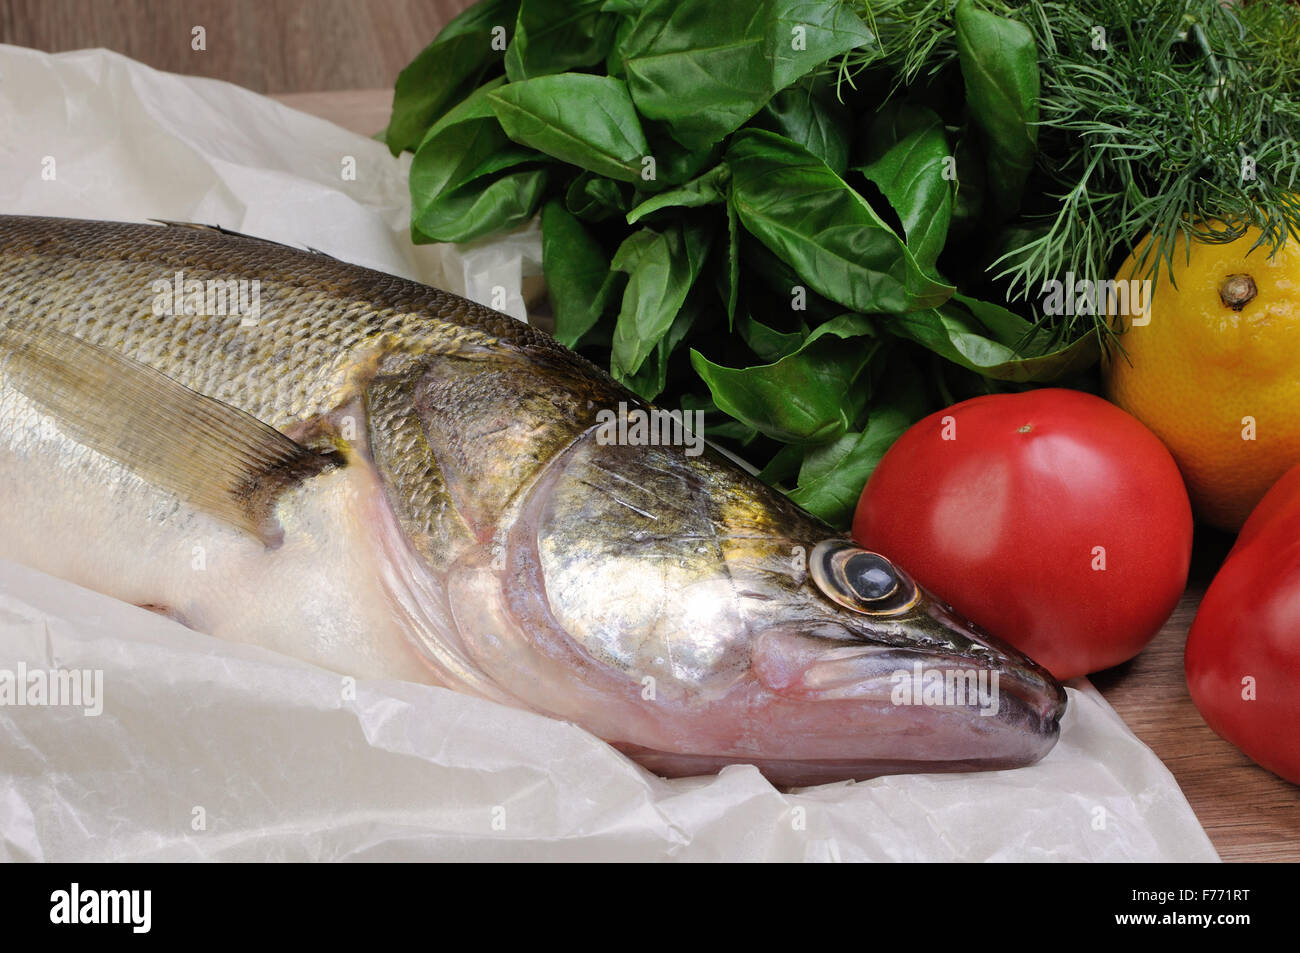 Raw fish pike perch on a paper with basil, tomatoes, dill, lemon Stock Photo